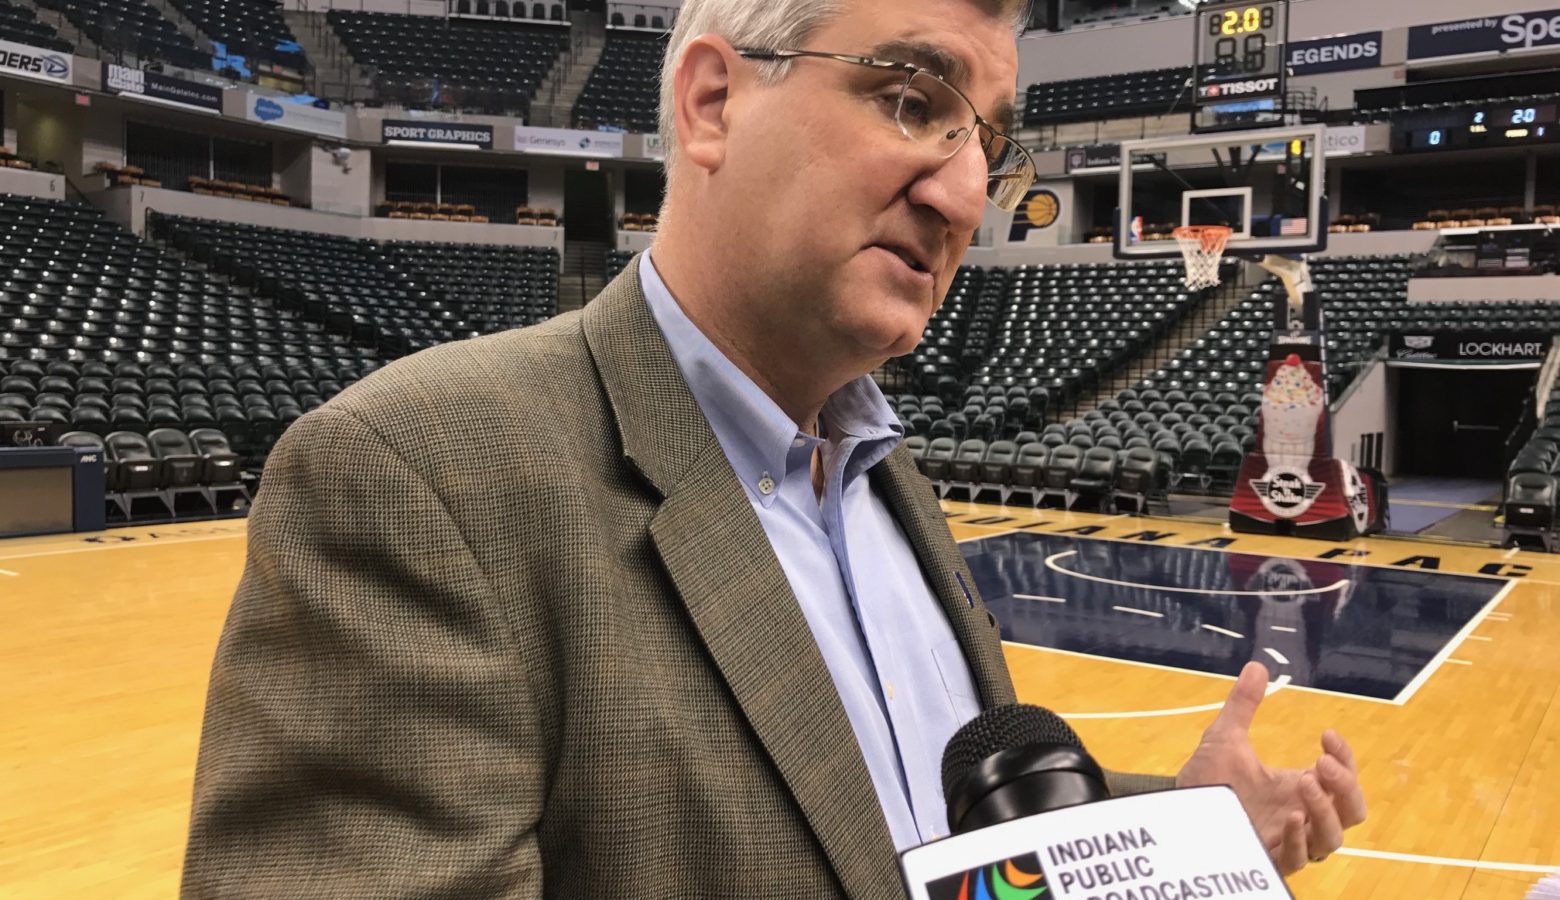 Gov. Eric Holcomb (R-Indiana) says he wants Indiana's Medicaid expansion - through its HIP 2.0 program - continued as federal lawmakers debate health care reform. (Brandon Smith/IPB News)